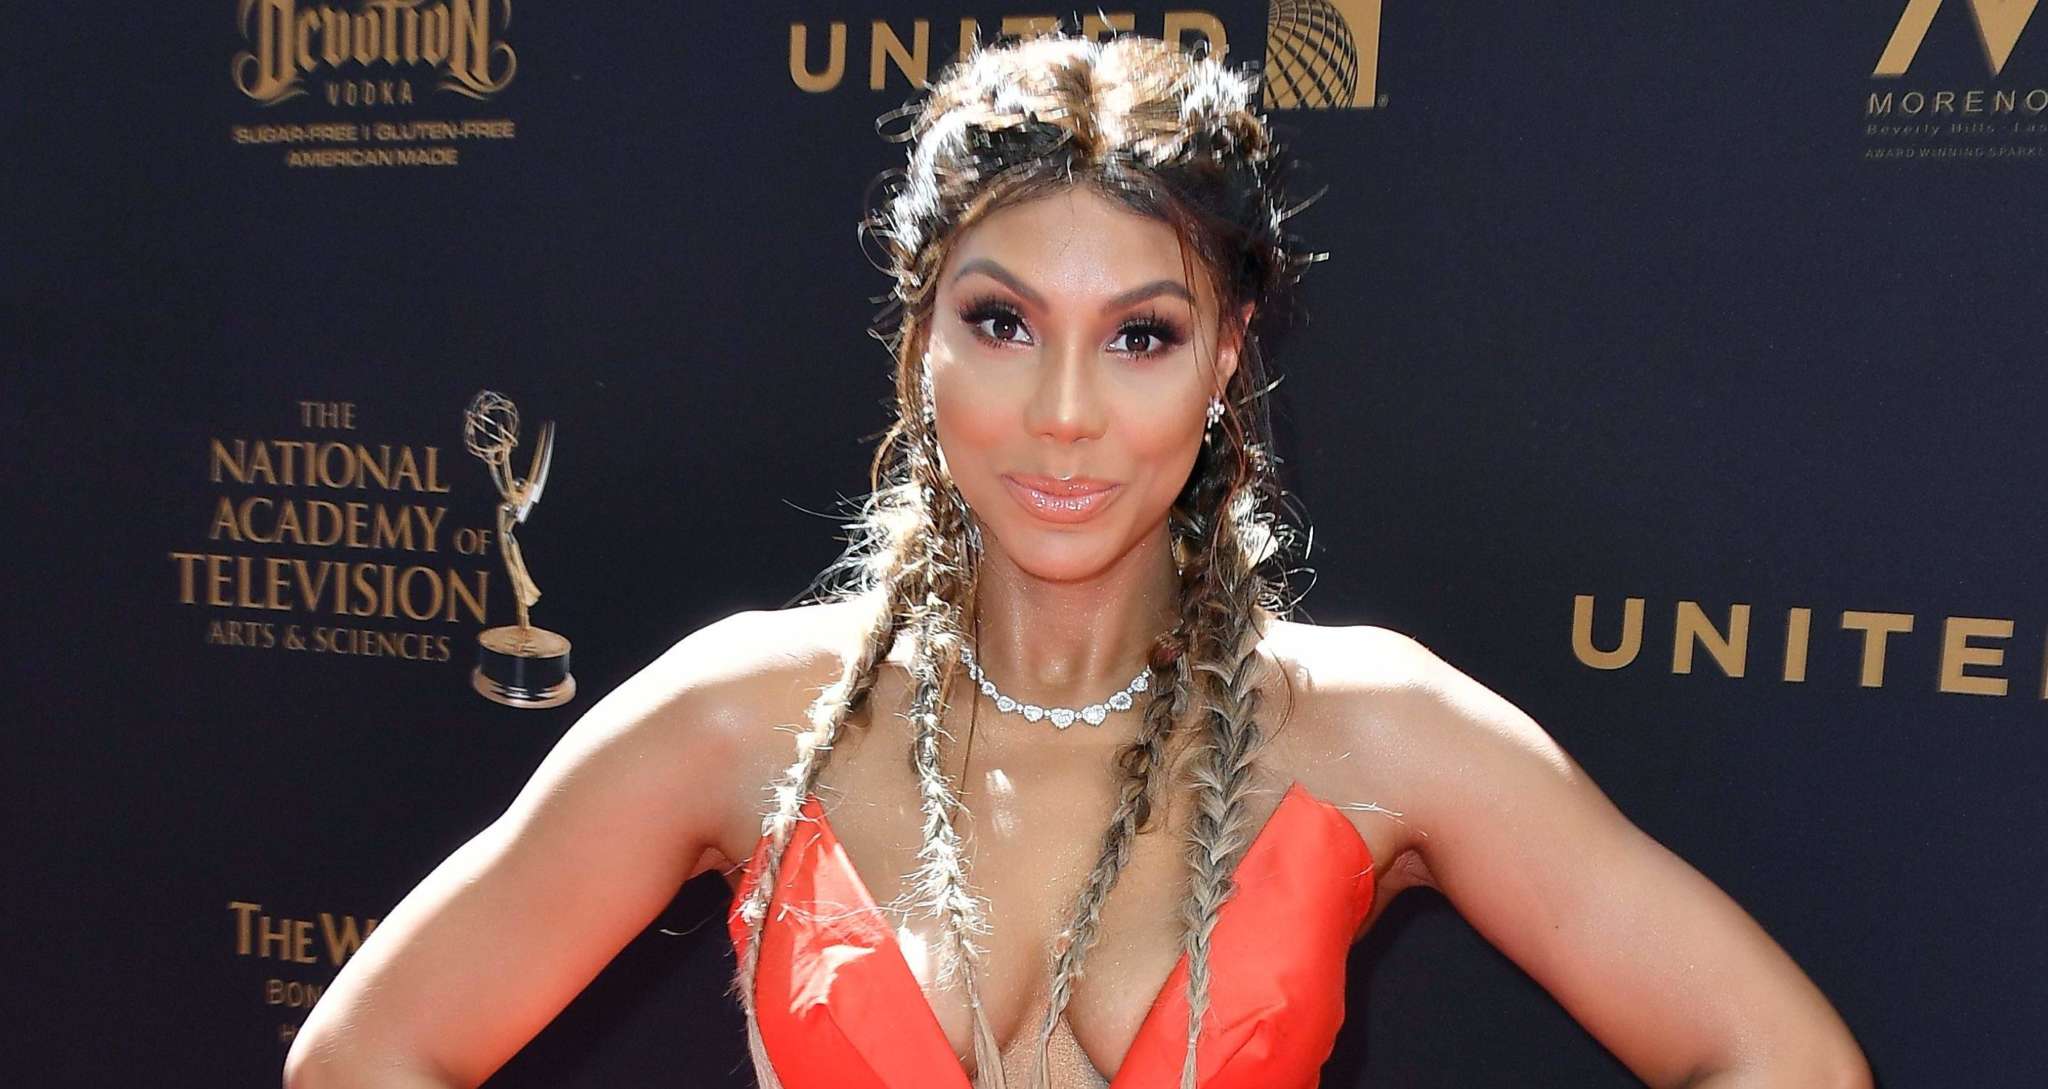 Tamar Braxton's Latest Video On Stage Has Fans Going Crazy Over Her Amazing Voice